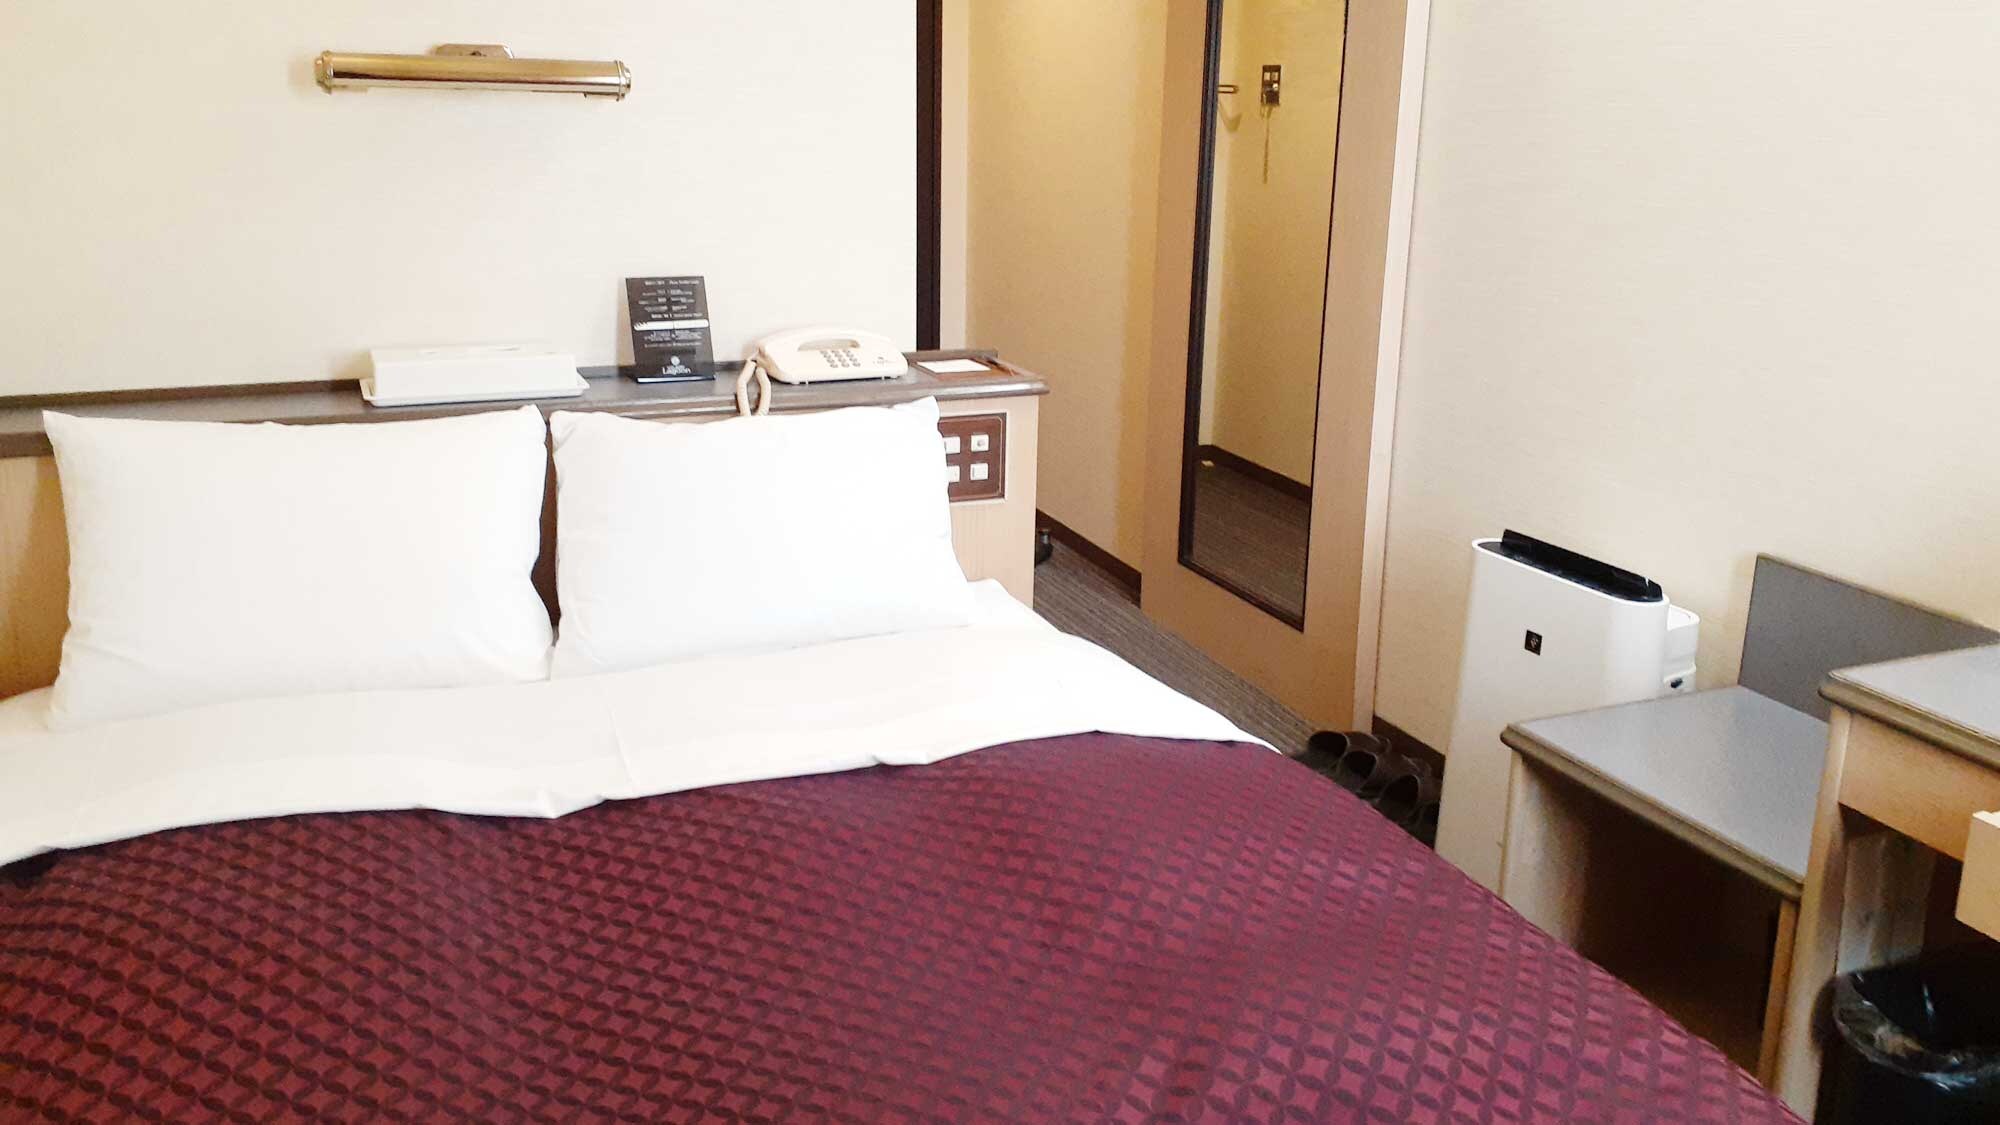 ■ Double room 14 square meters bed width 140 cm